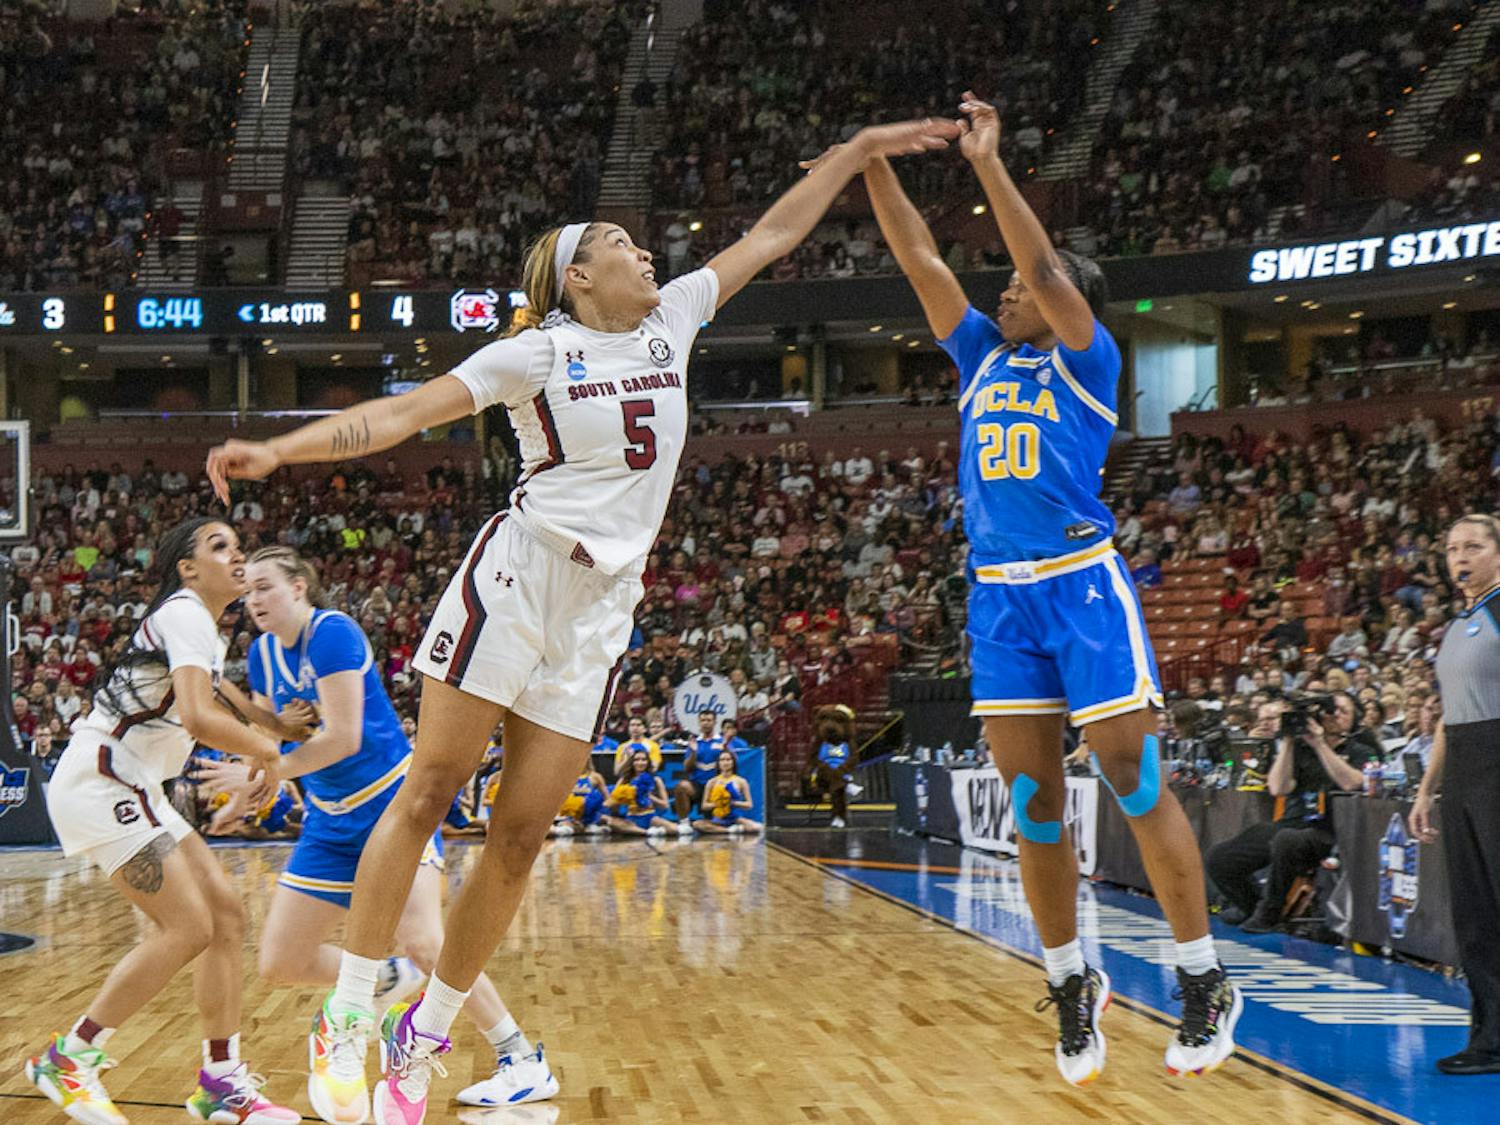 Senior forward Victaria Saxton attempts to block UCLA senior guard Charisma Osbourne's 3-point shot during the matchup between South Carolina and UCLA at Bon Secours Wellness Arena on March 25, 2023. The Gamecocks beat the Bruins 59-43 and will move on to the Elite Eight tournament.&nbsp;